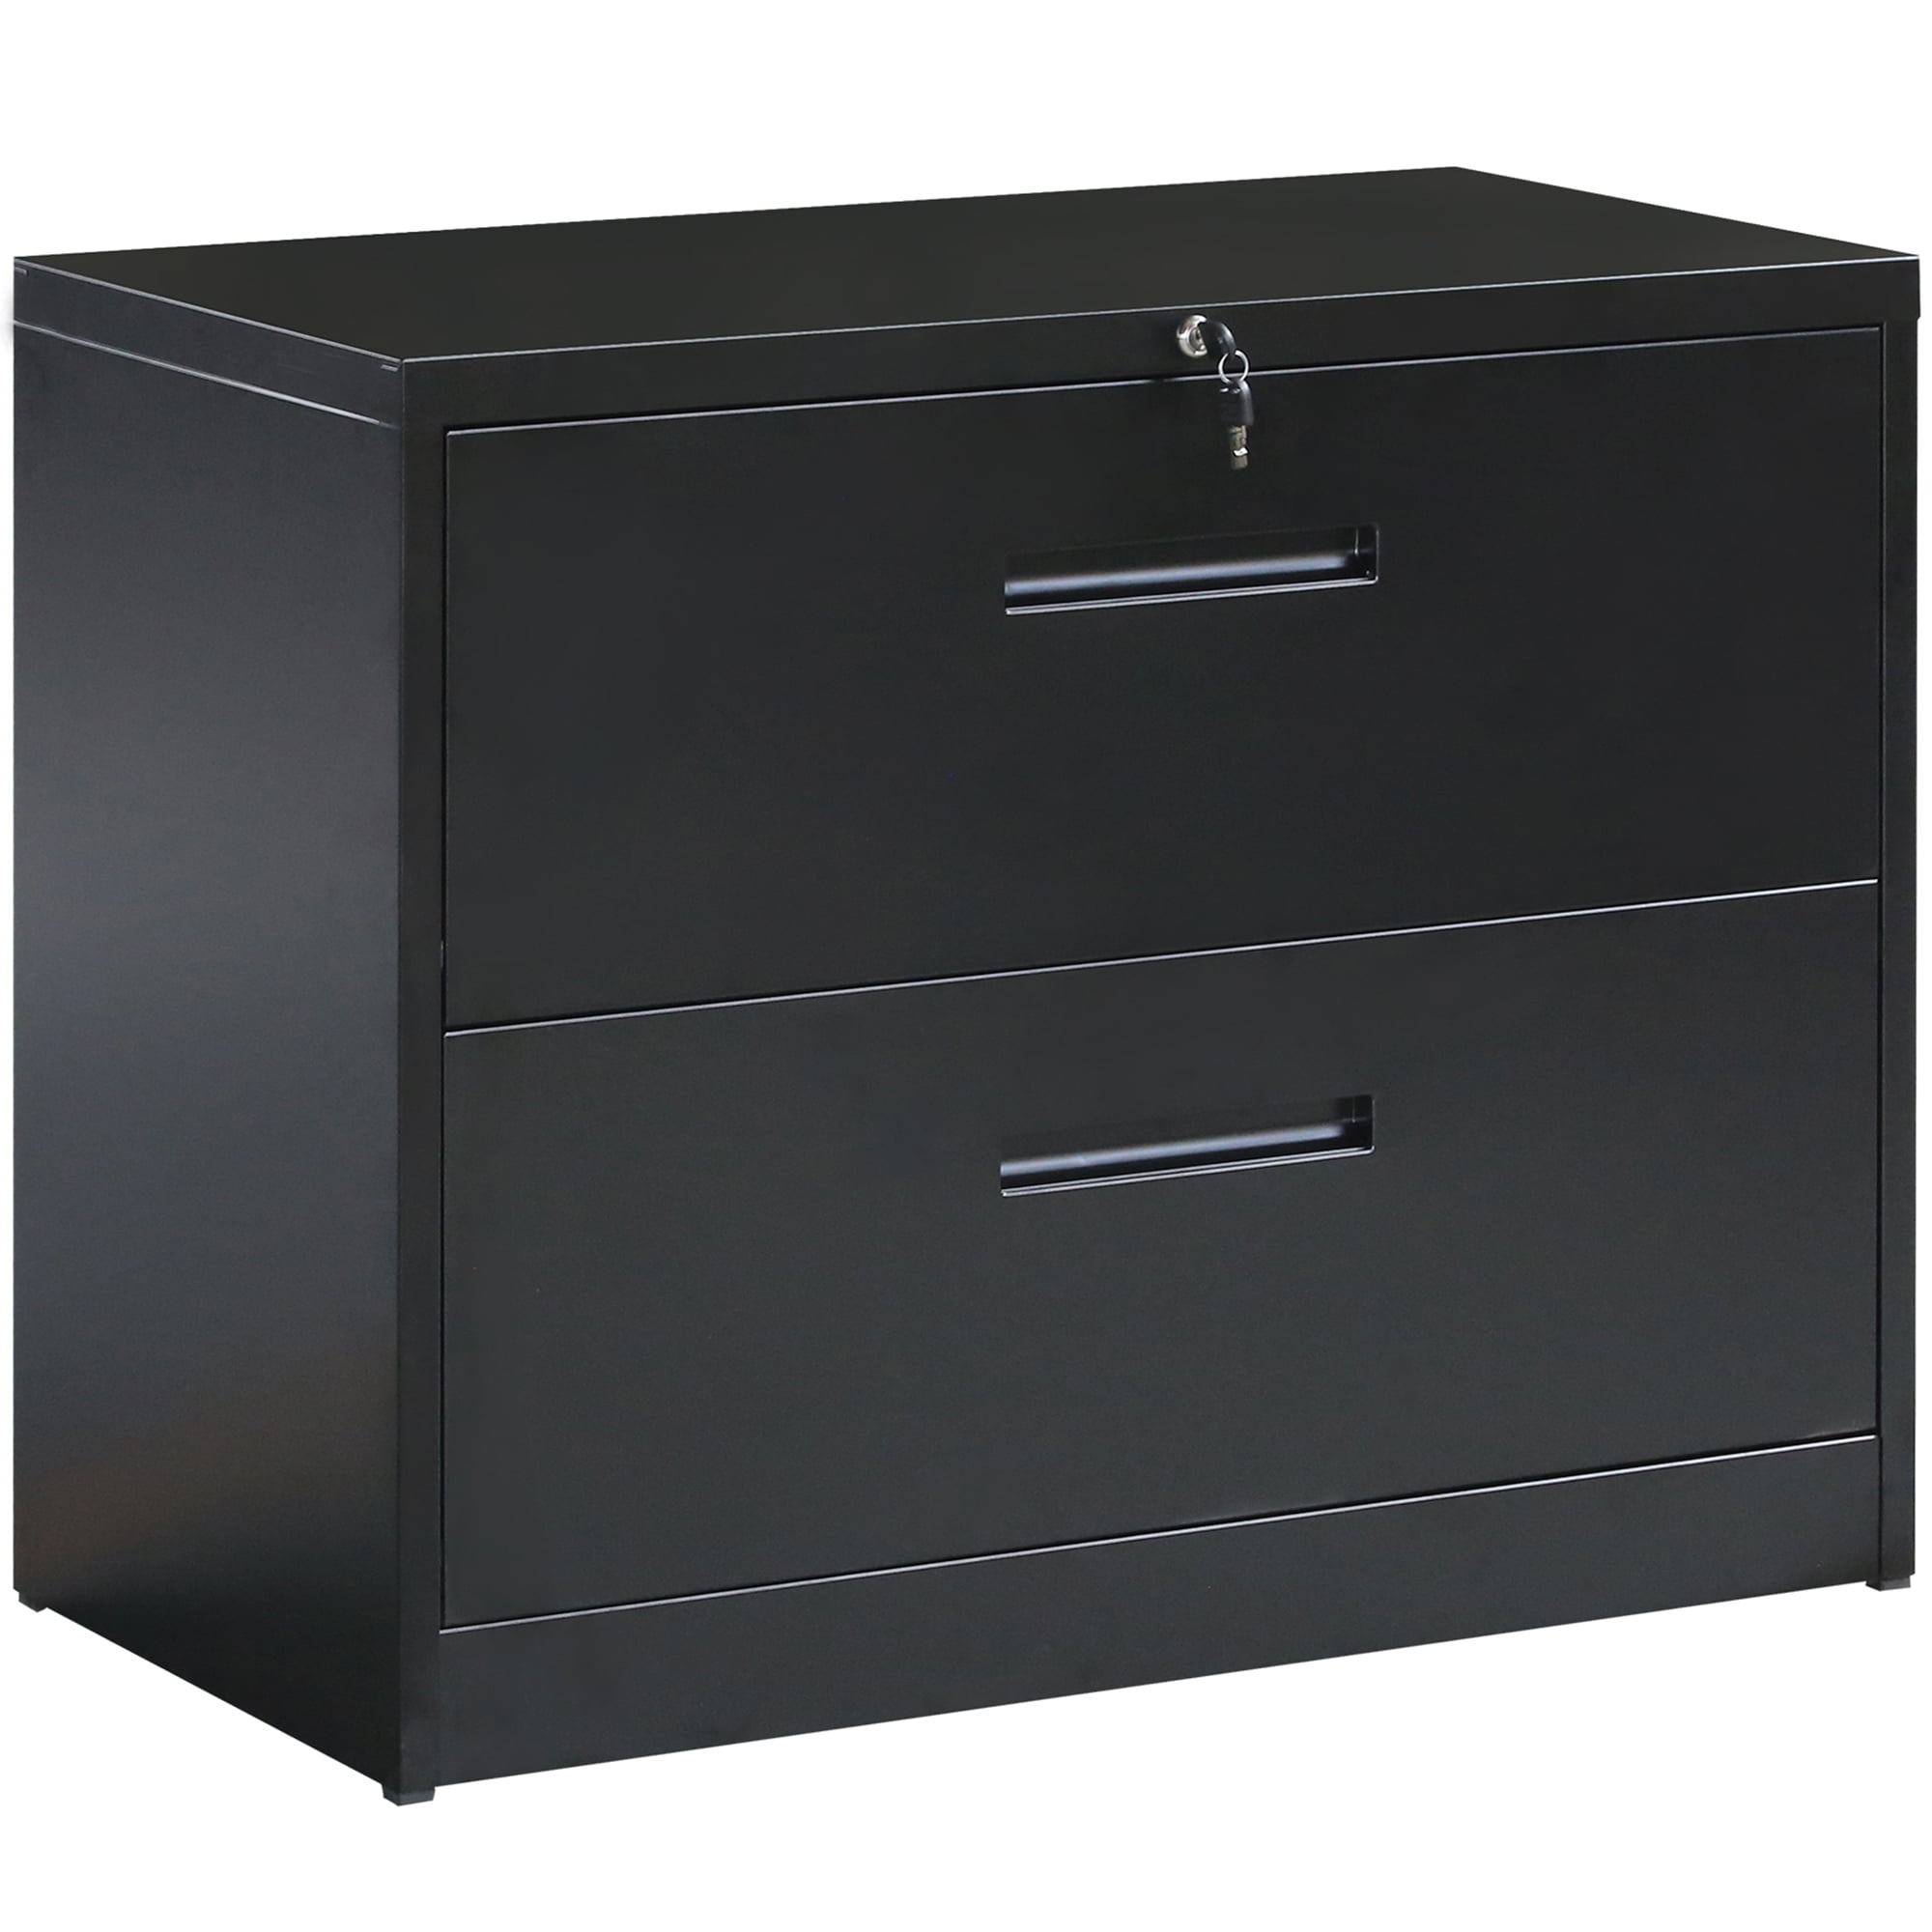 Functional Filing Cabinets For Home Offices